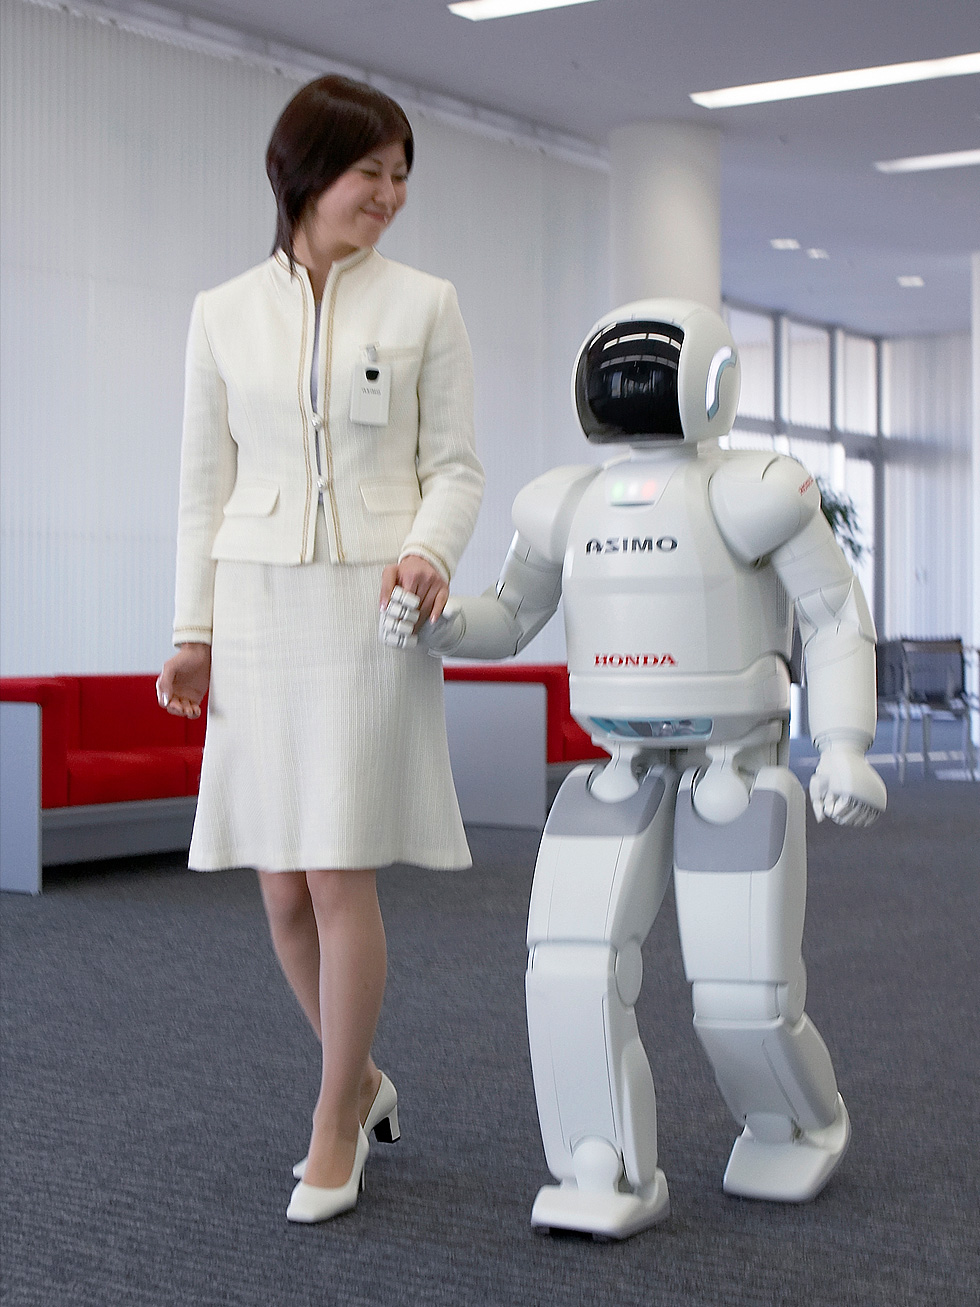 ASIMO holding hands with human